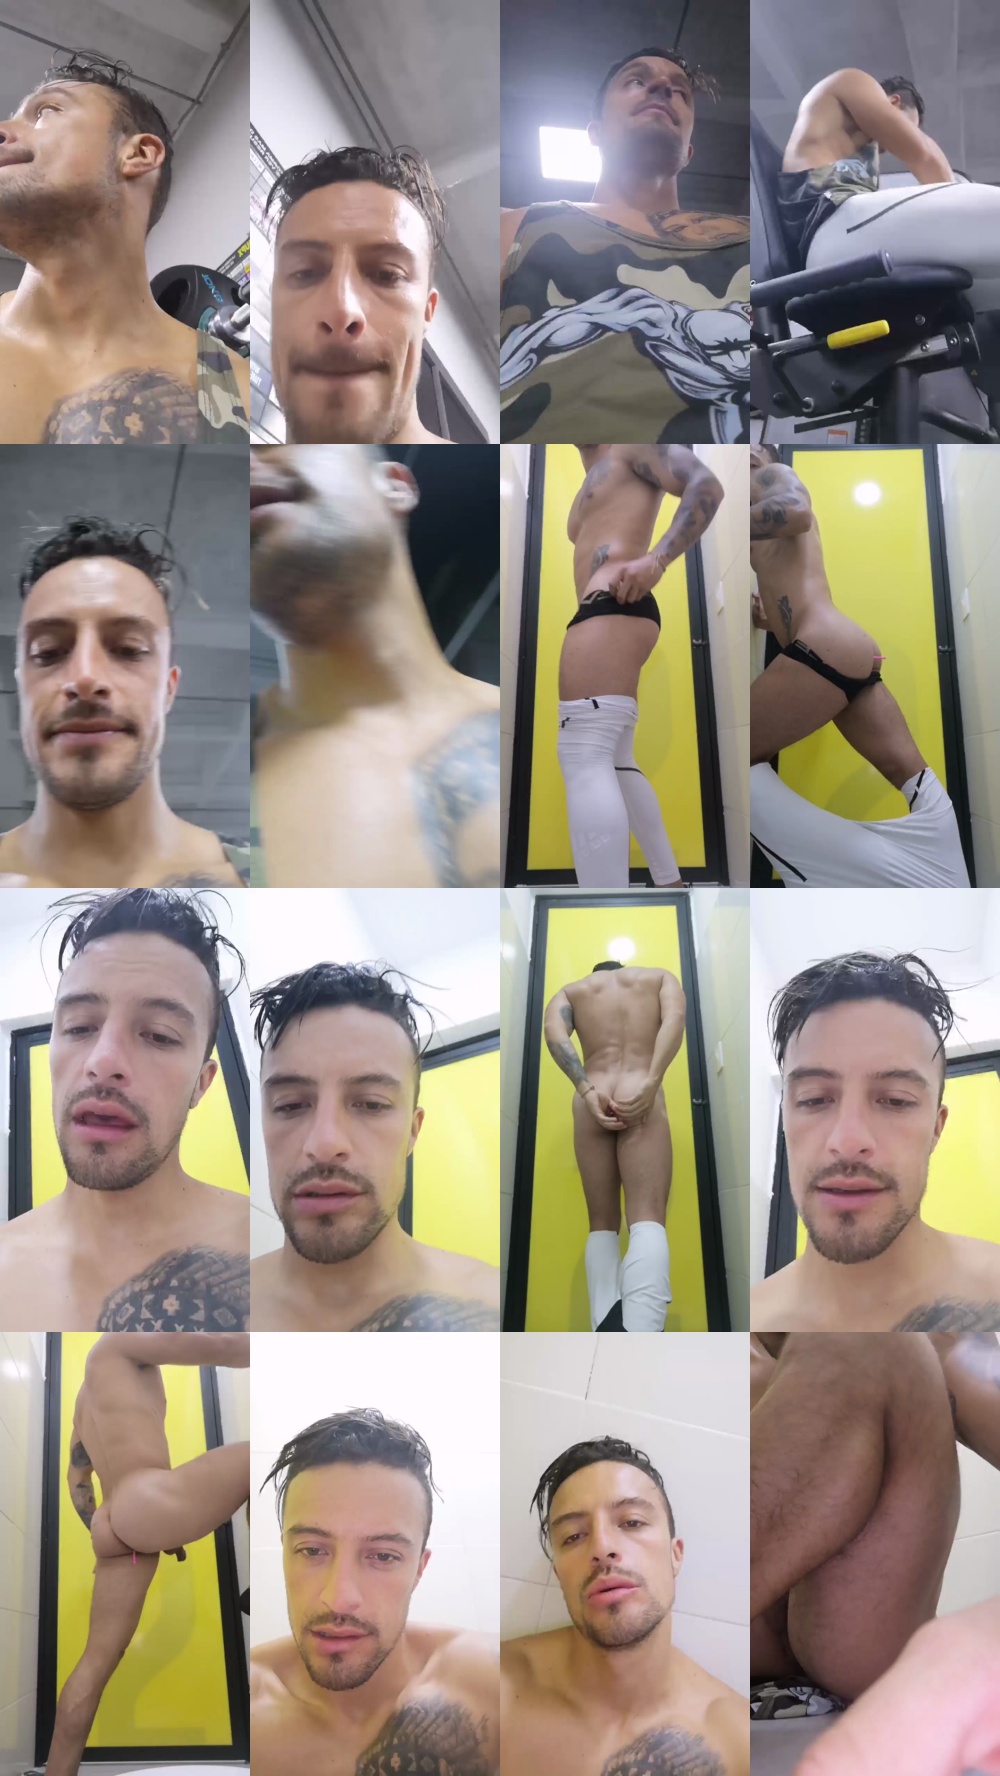 mathew_horny 04-09-2019  Recorded Video Topless